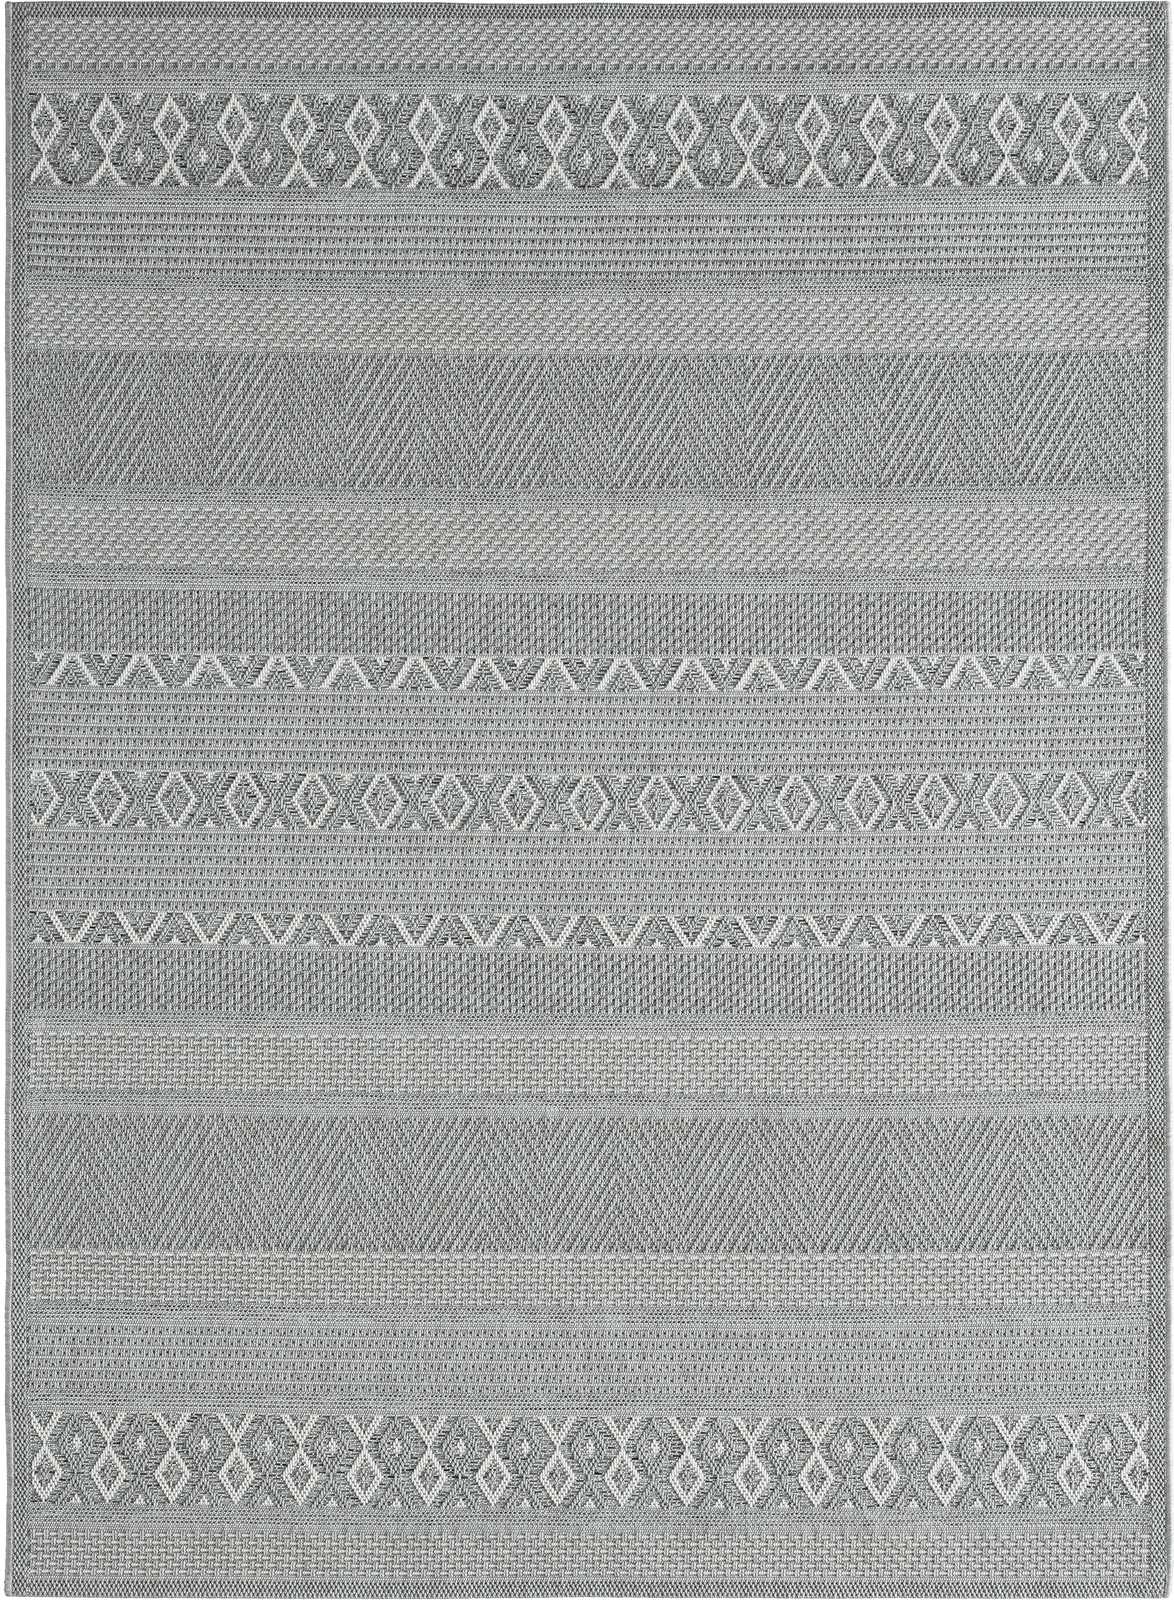             Simple Patterned Outdoor Rug in Grey - 160 x 120 cm
        